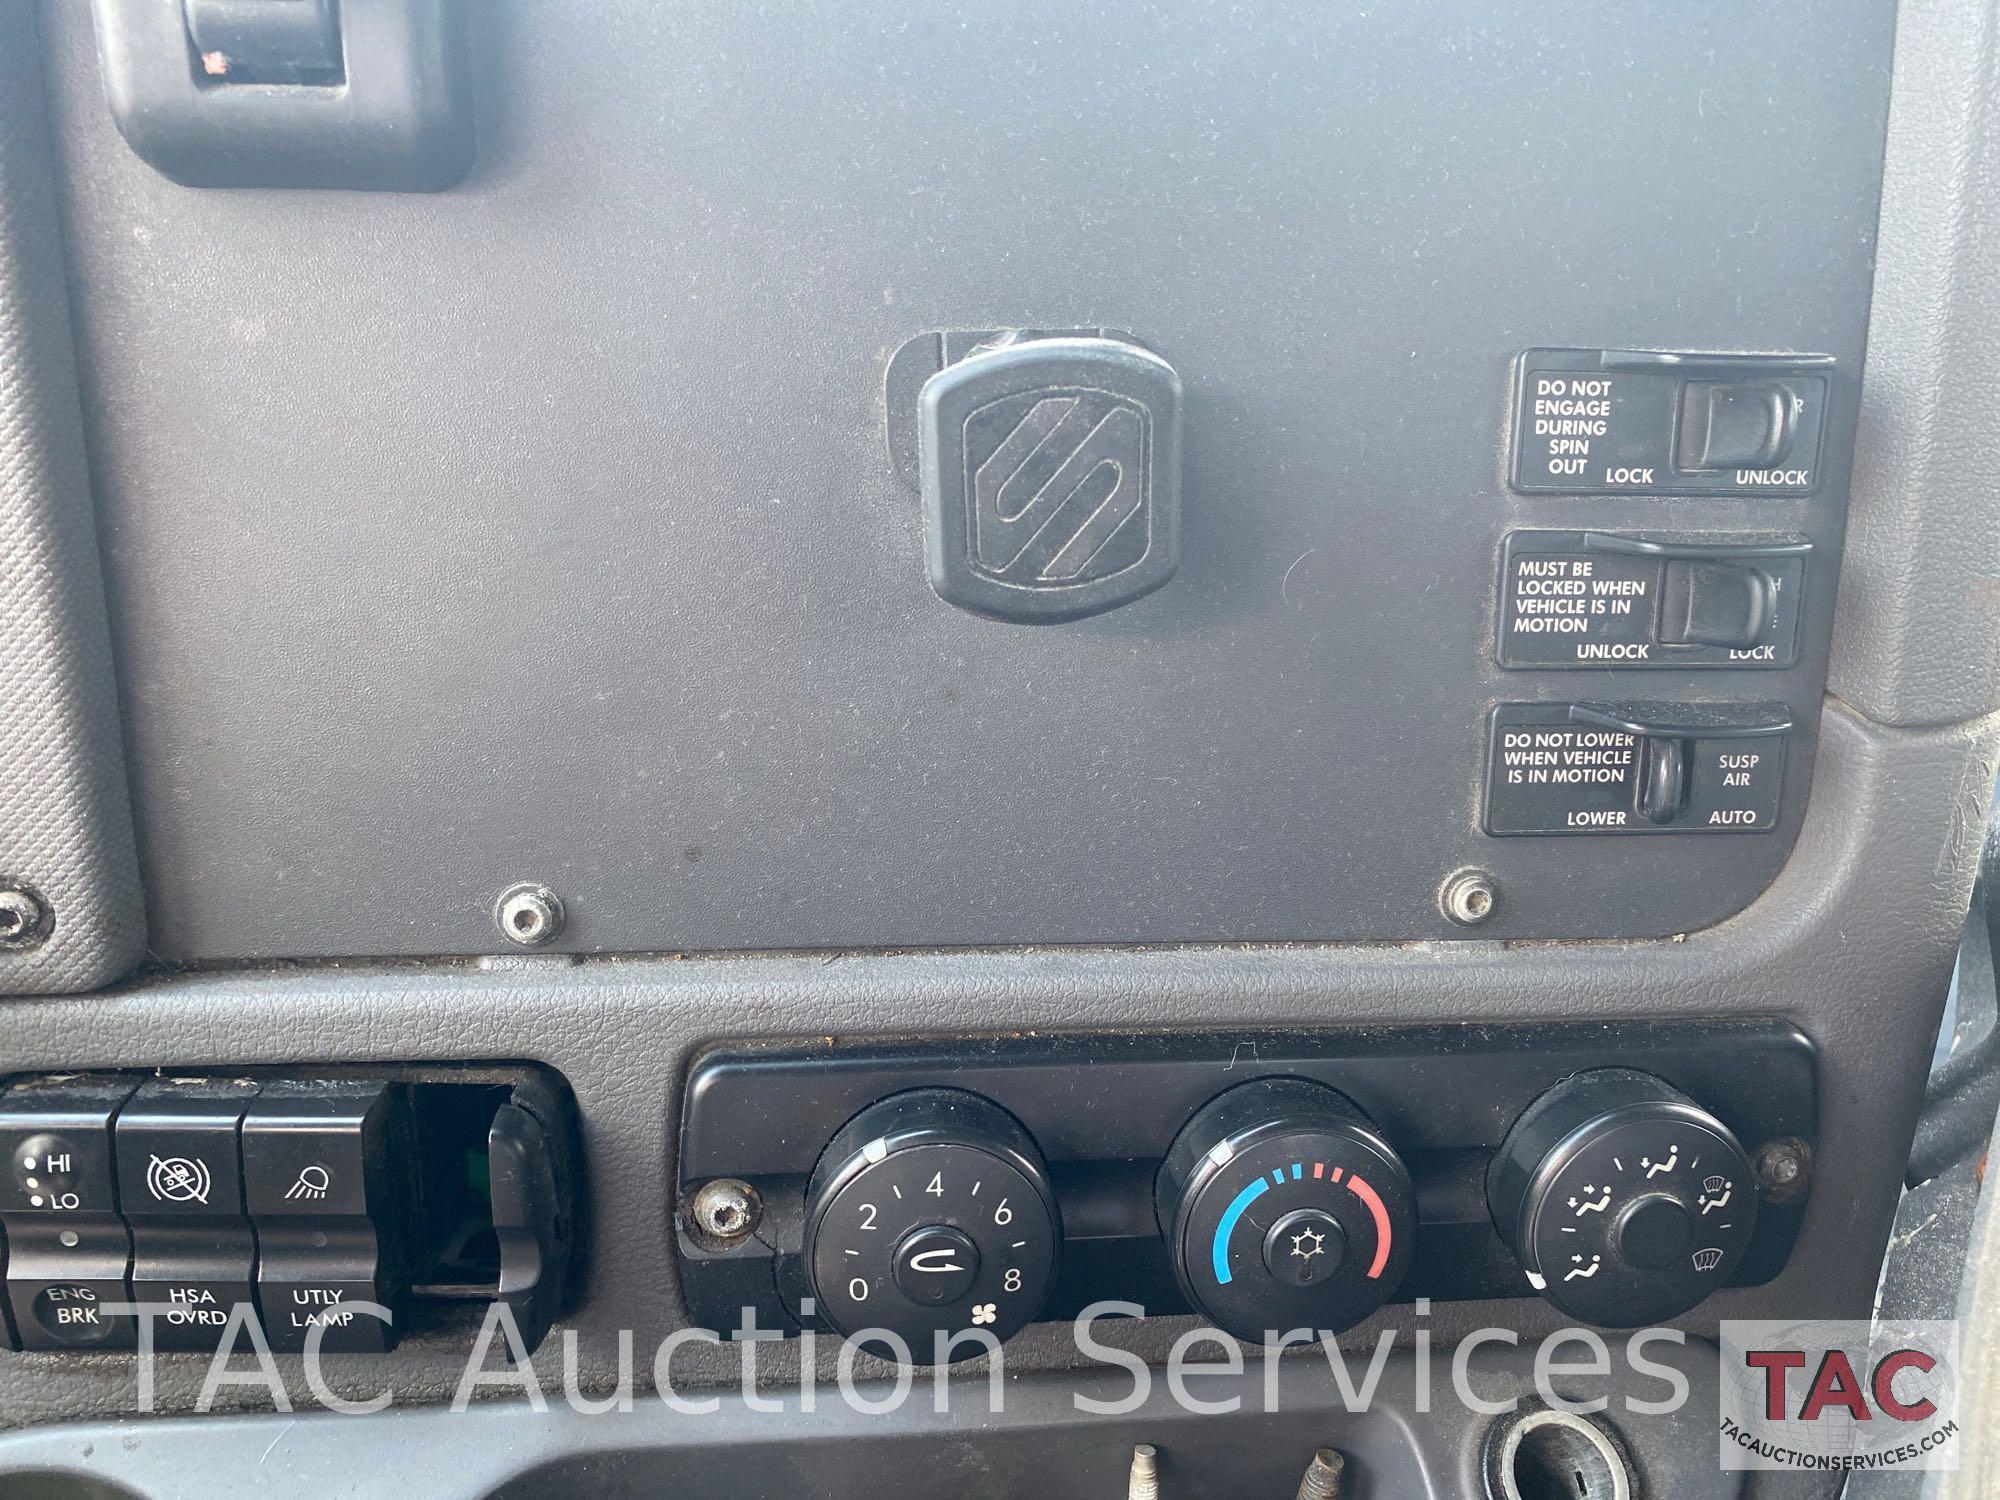 2013 Freightliner Cascadia Day Cab